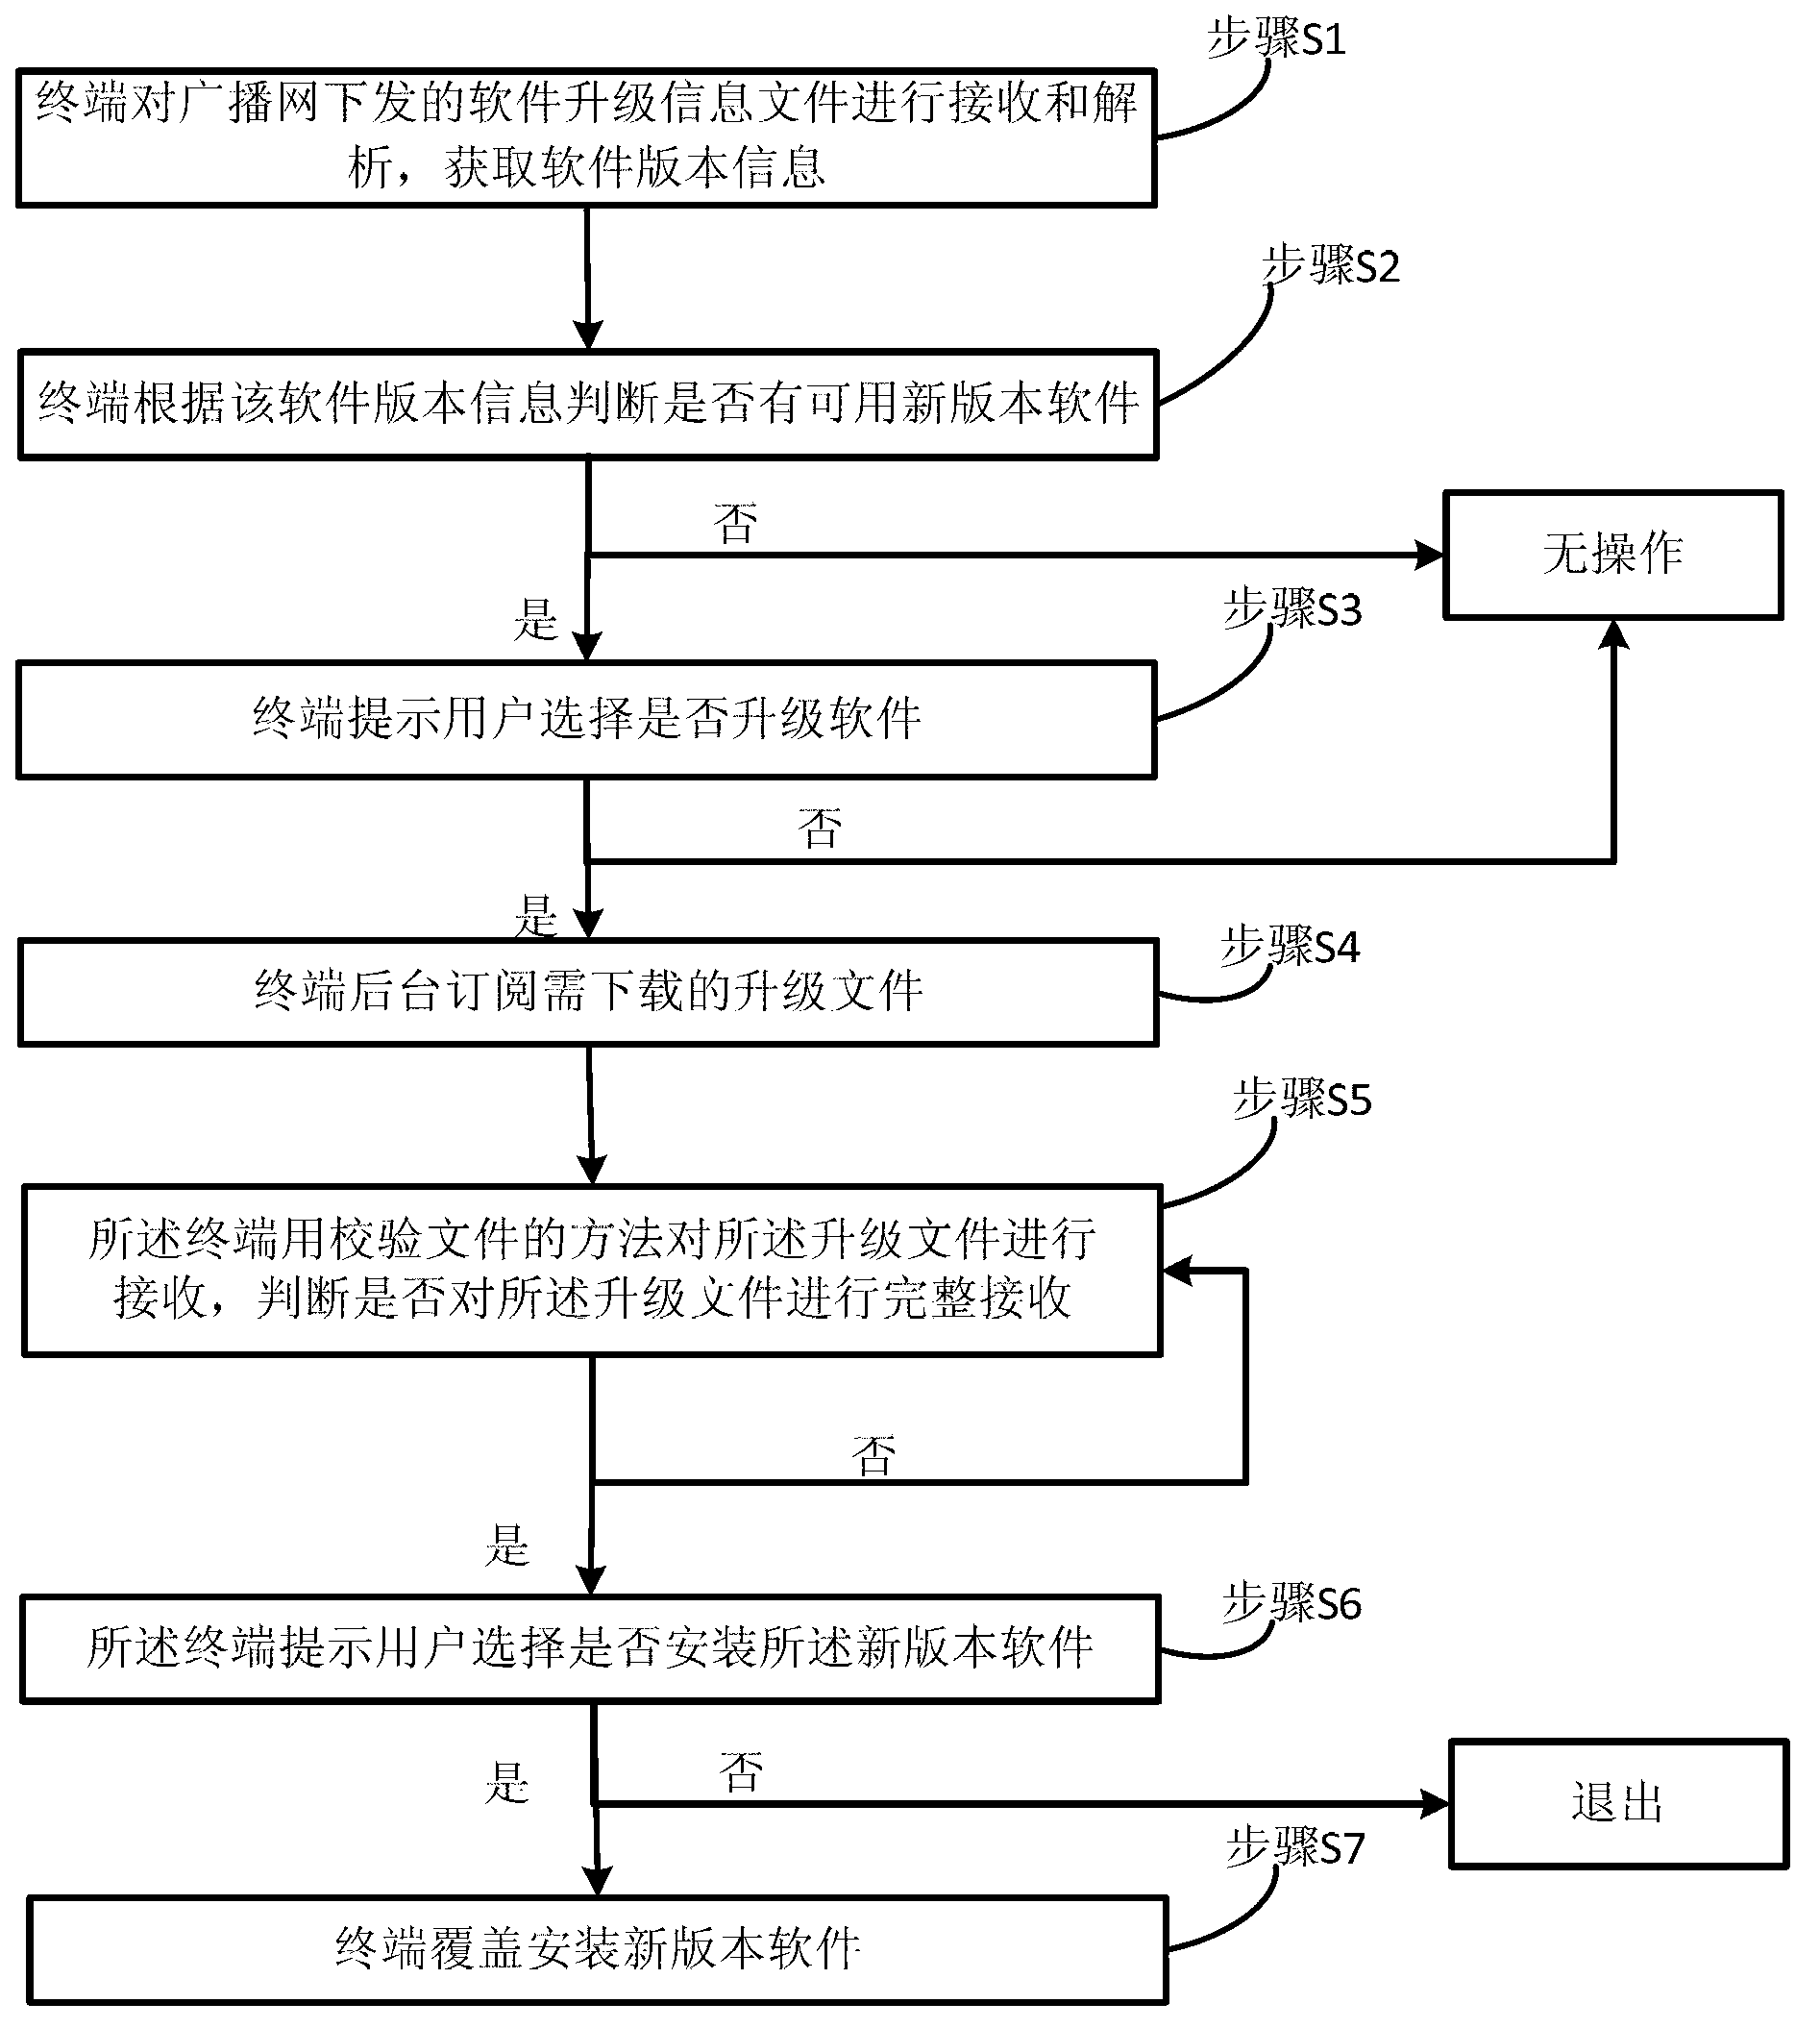 Air upgrading and uploading method of terminal software